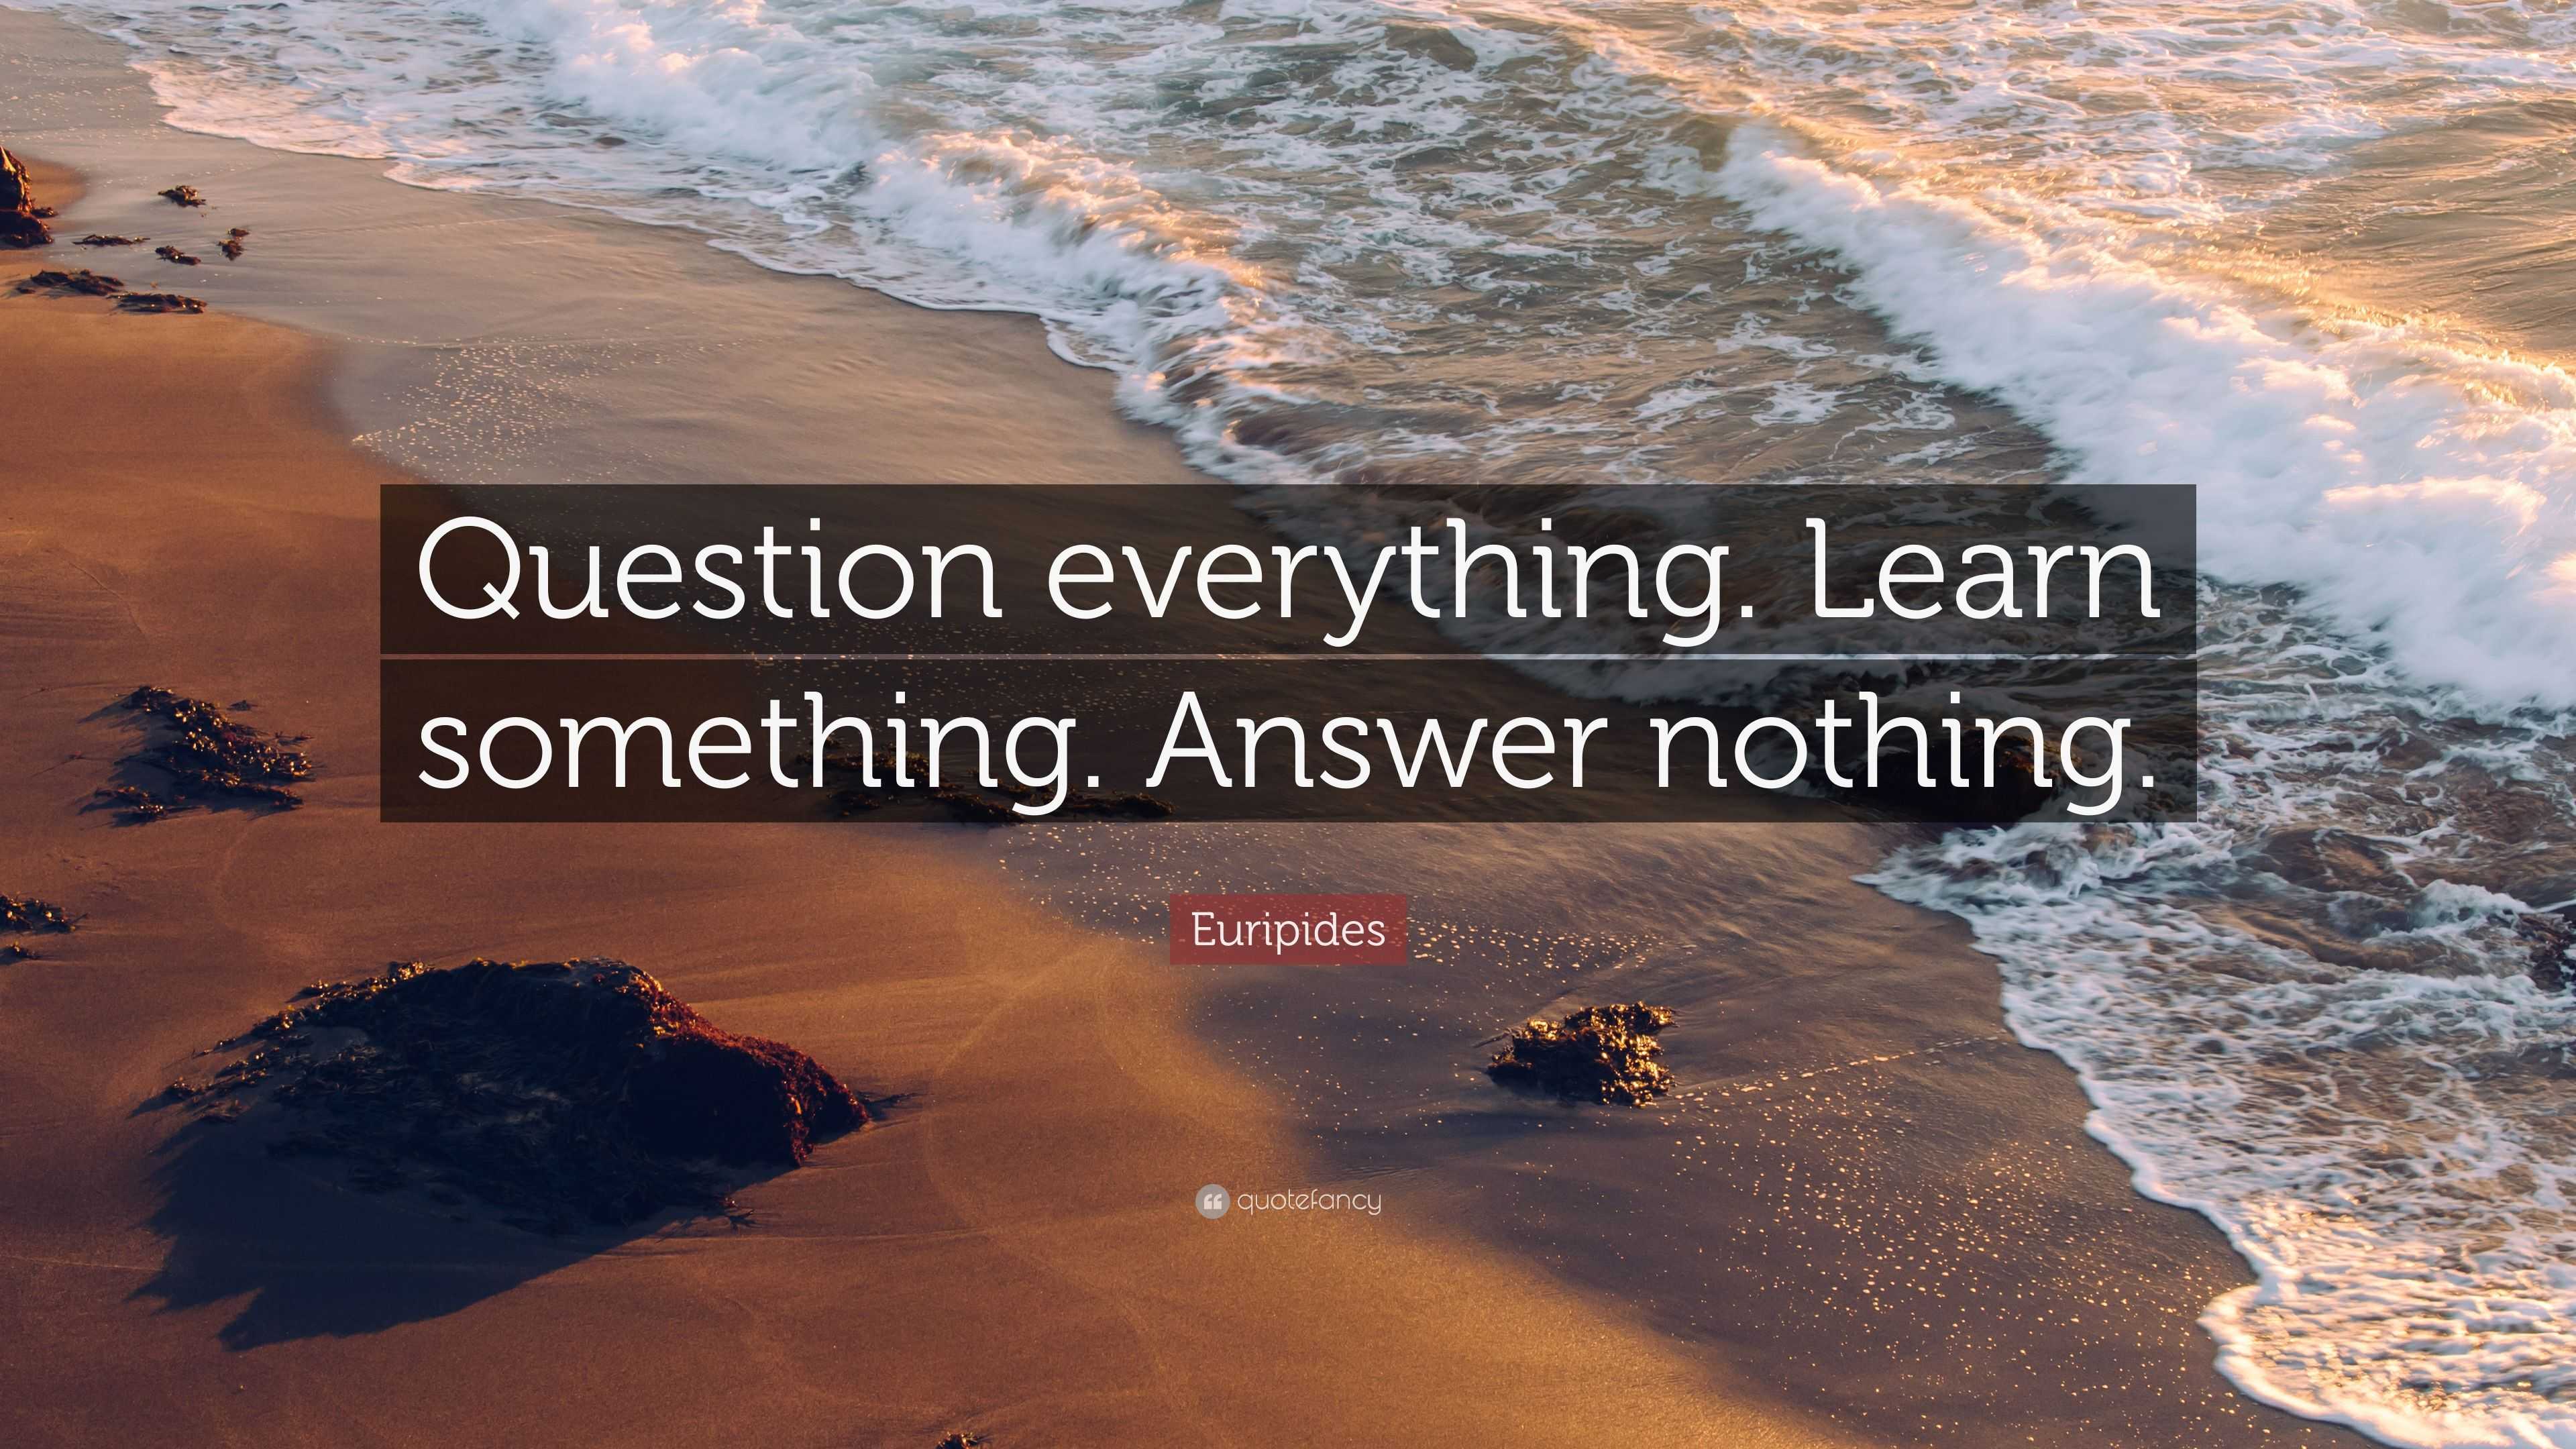 Euripides Quote “question Everything Learn Something Answer Nothing ”